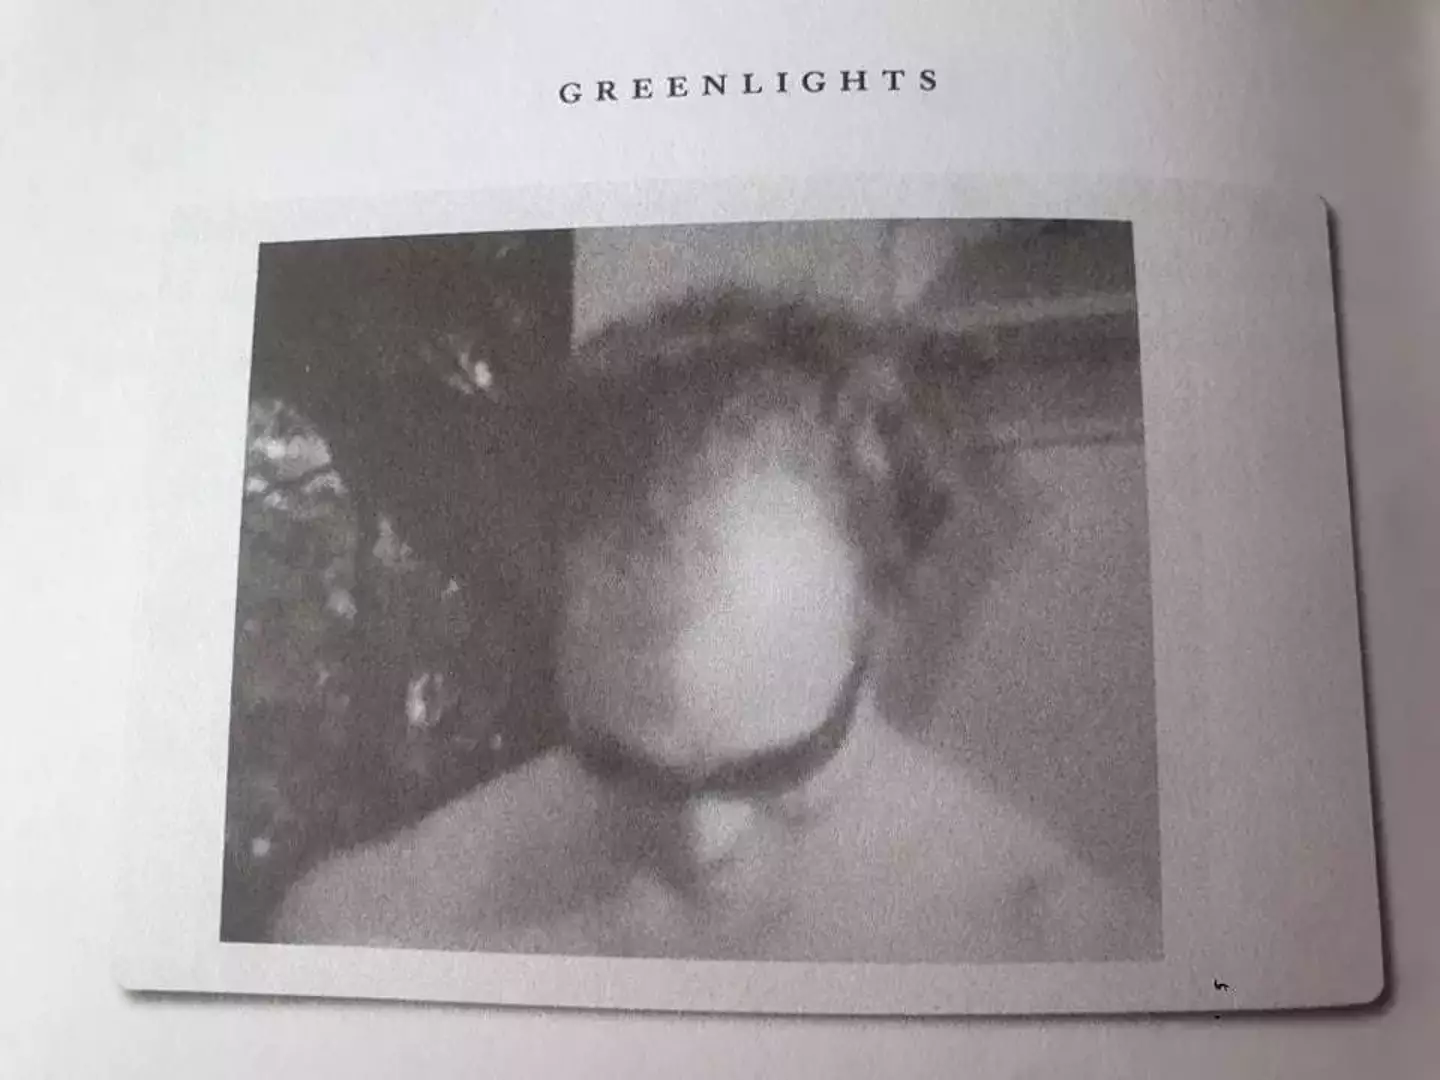 He opens up about his hair loss in his memoir, Greenlights.